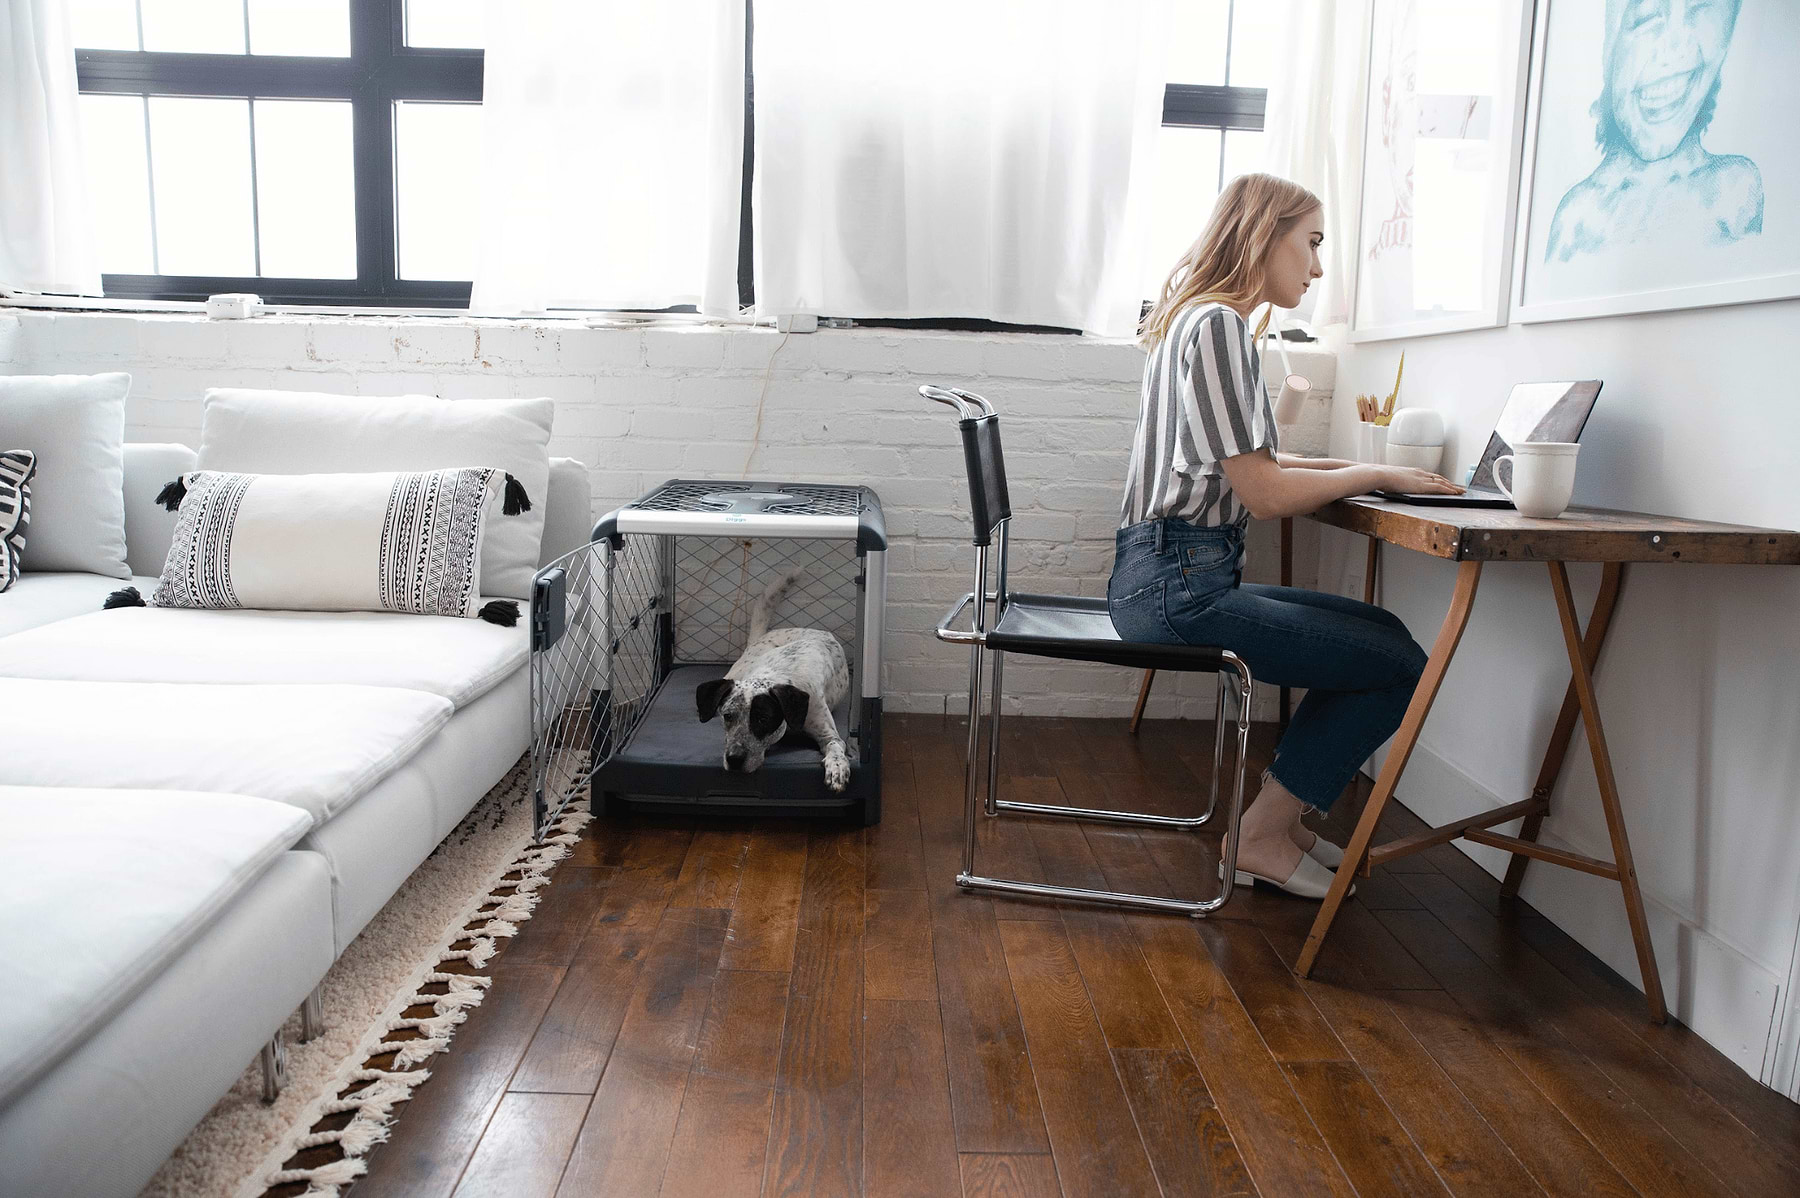 Woman Working at Desk While Dog is in Crate